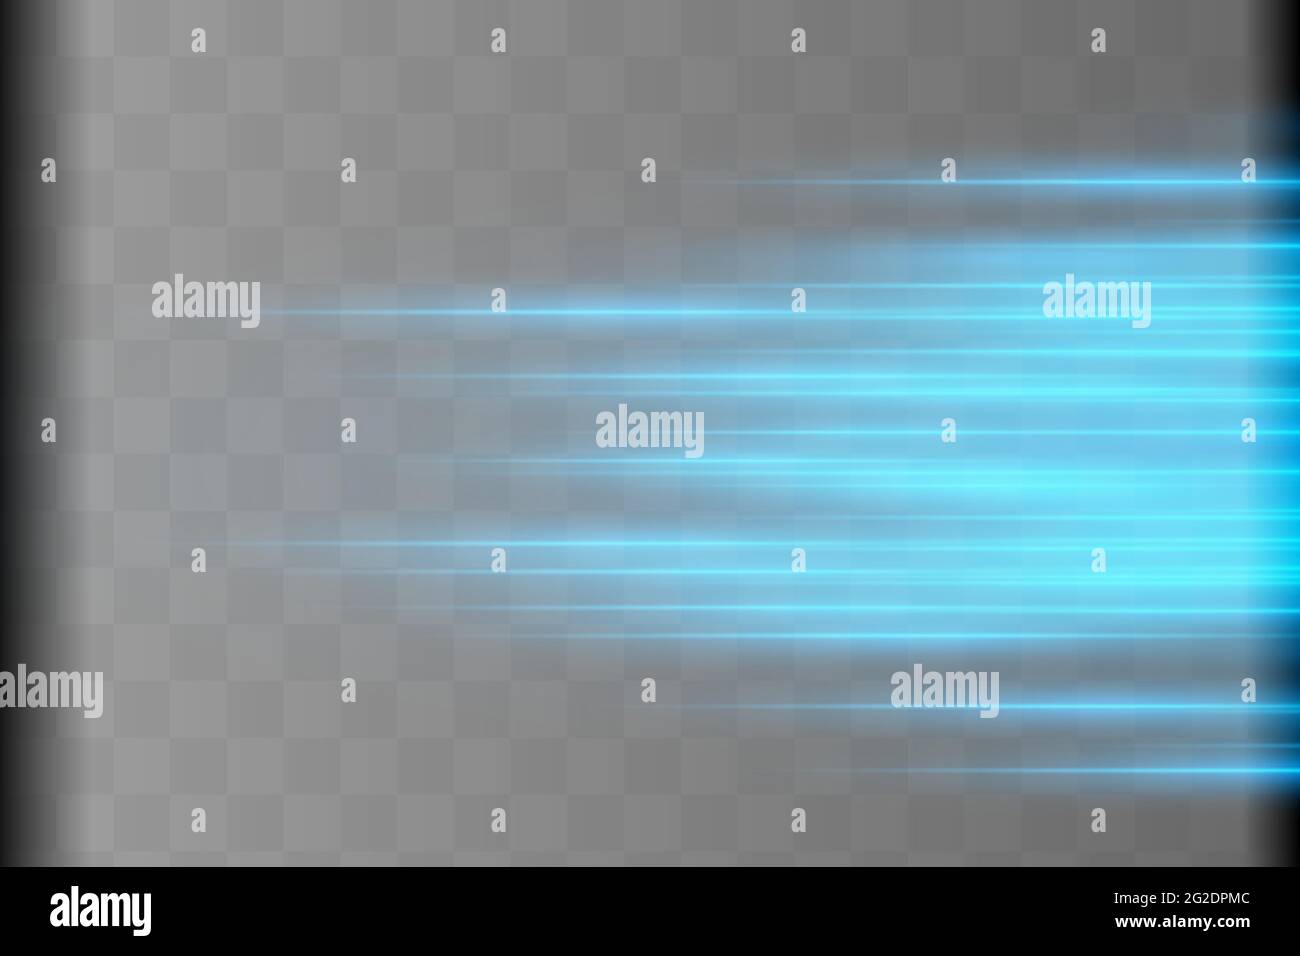 Abstract Blue Laser Beam Transparent Isolated On Black Background Vector Illustration The